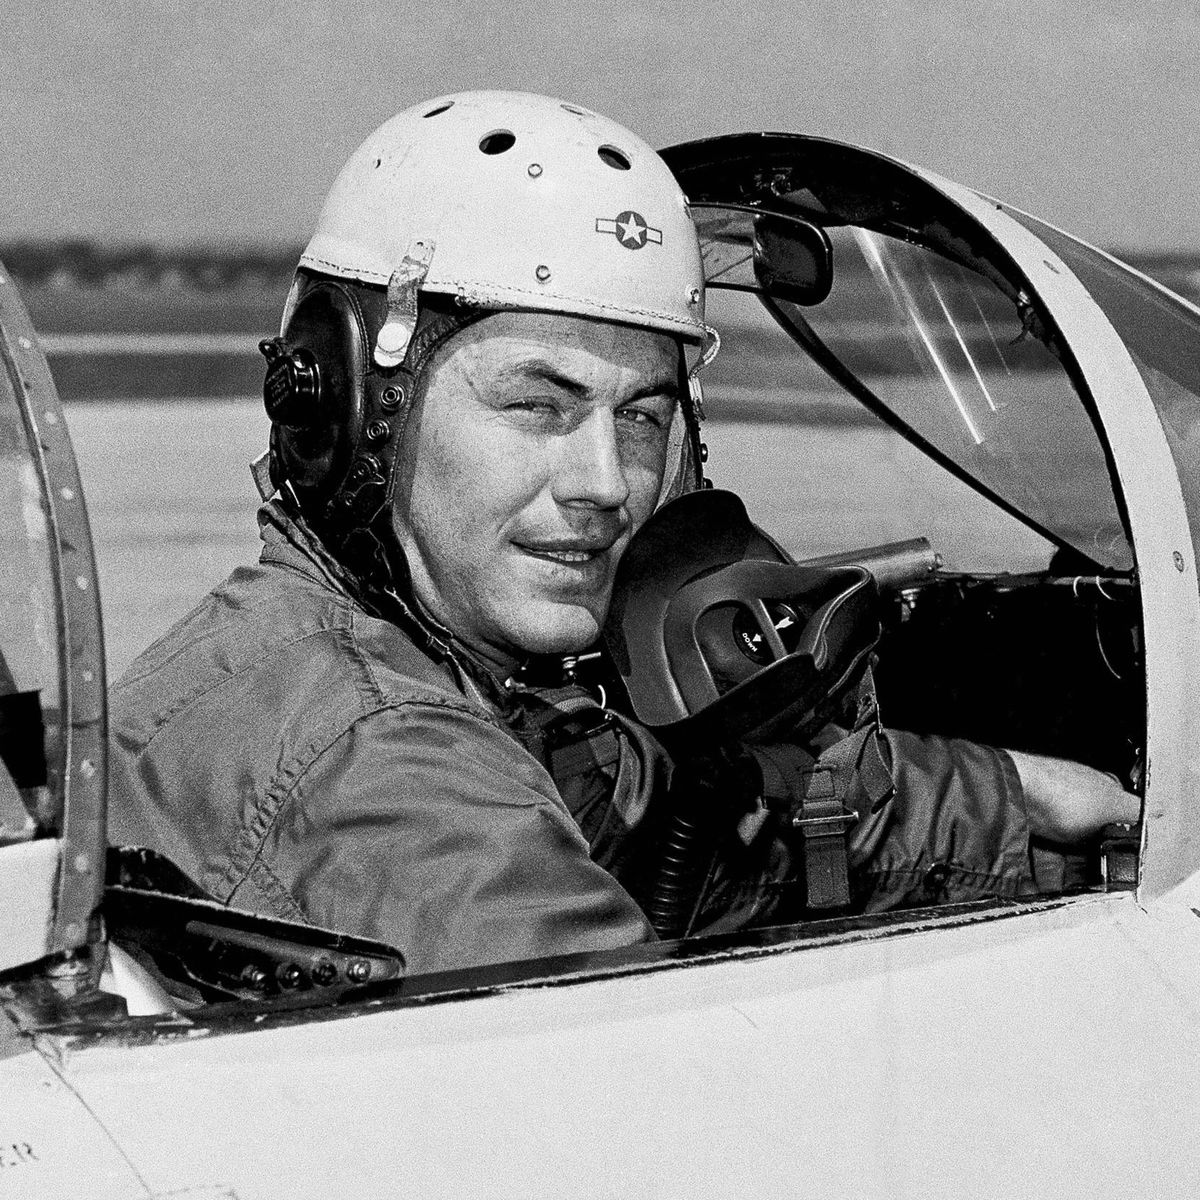 Sam Shepard showed he had 'The Right Stuff' as pilot Chuck Yeager